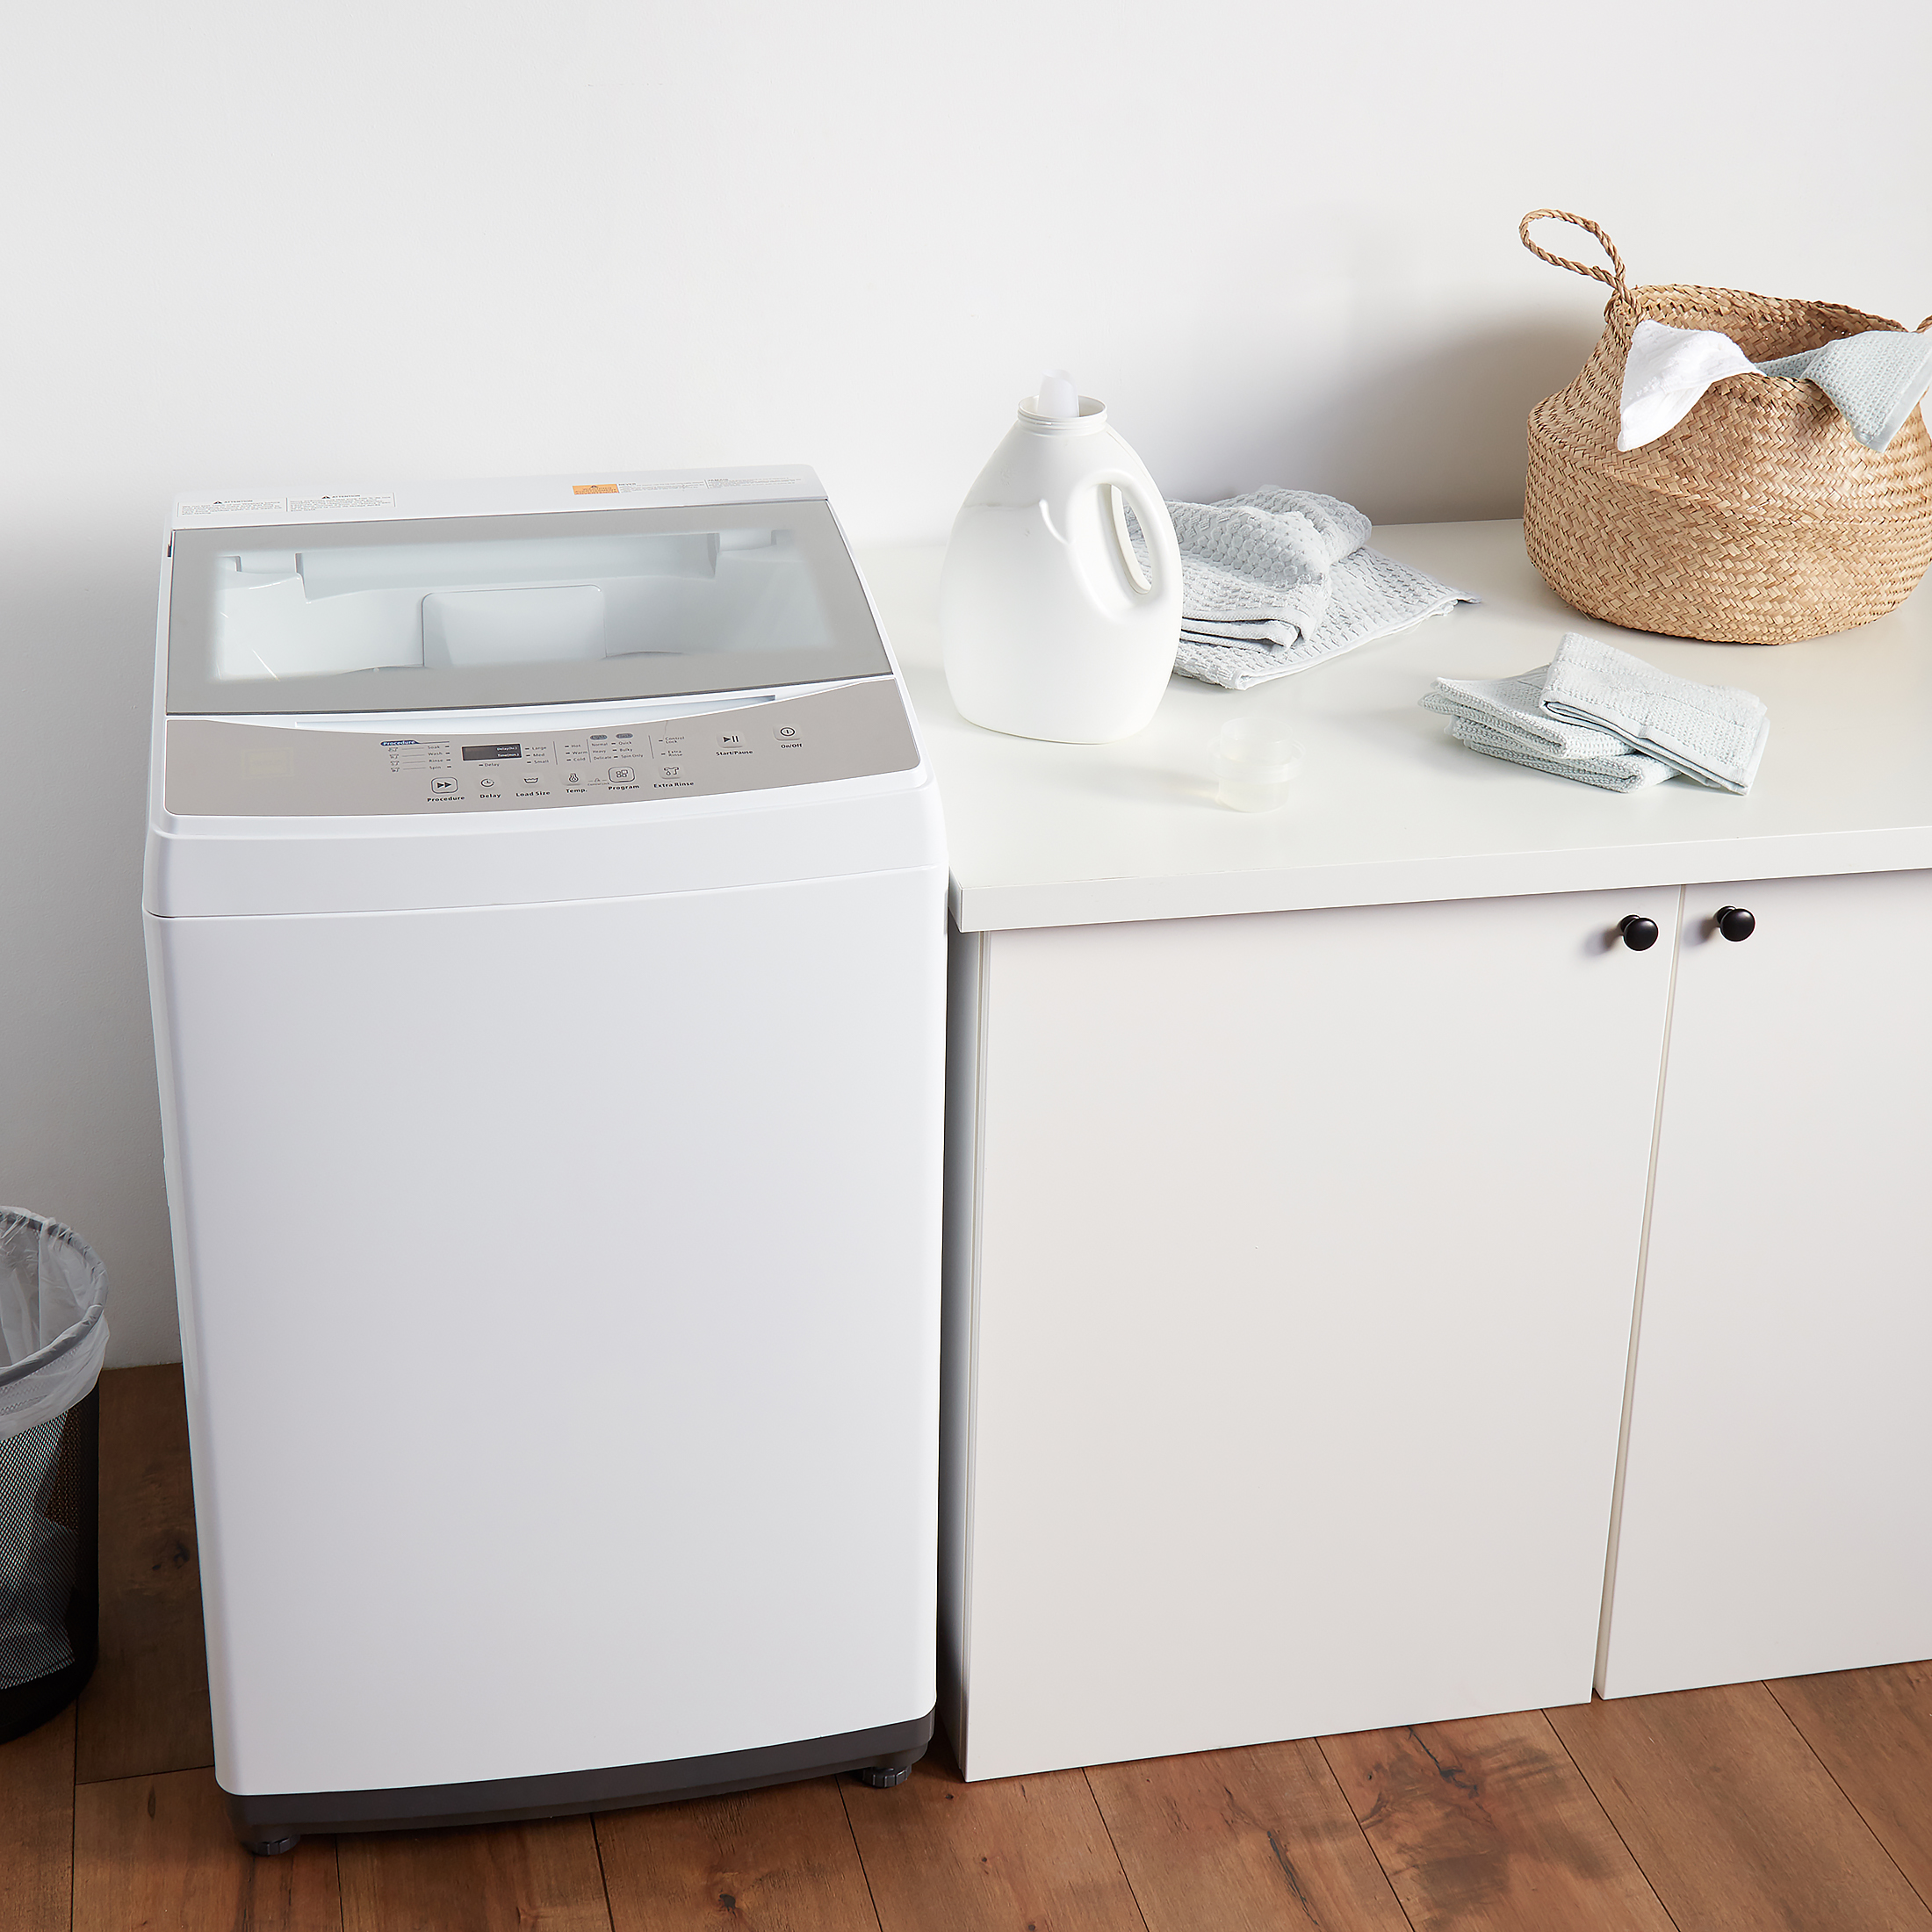 RCA 2.0 Cu. Ft. Portable Washer RPW210, White - image 2 of 8